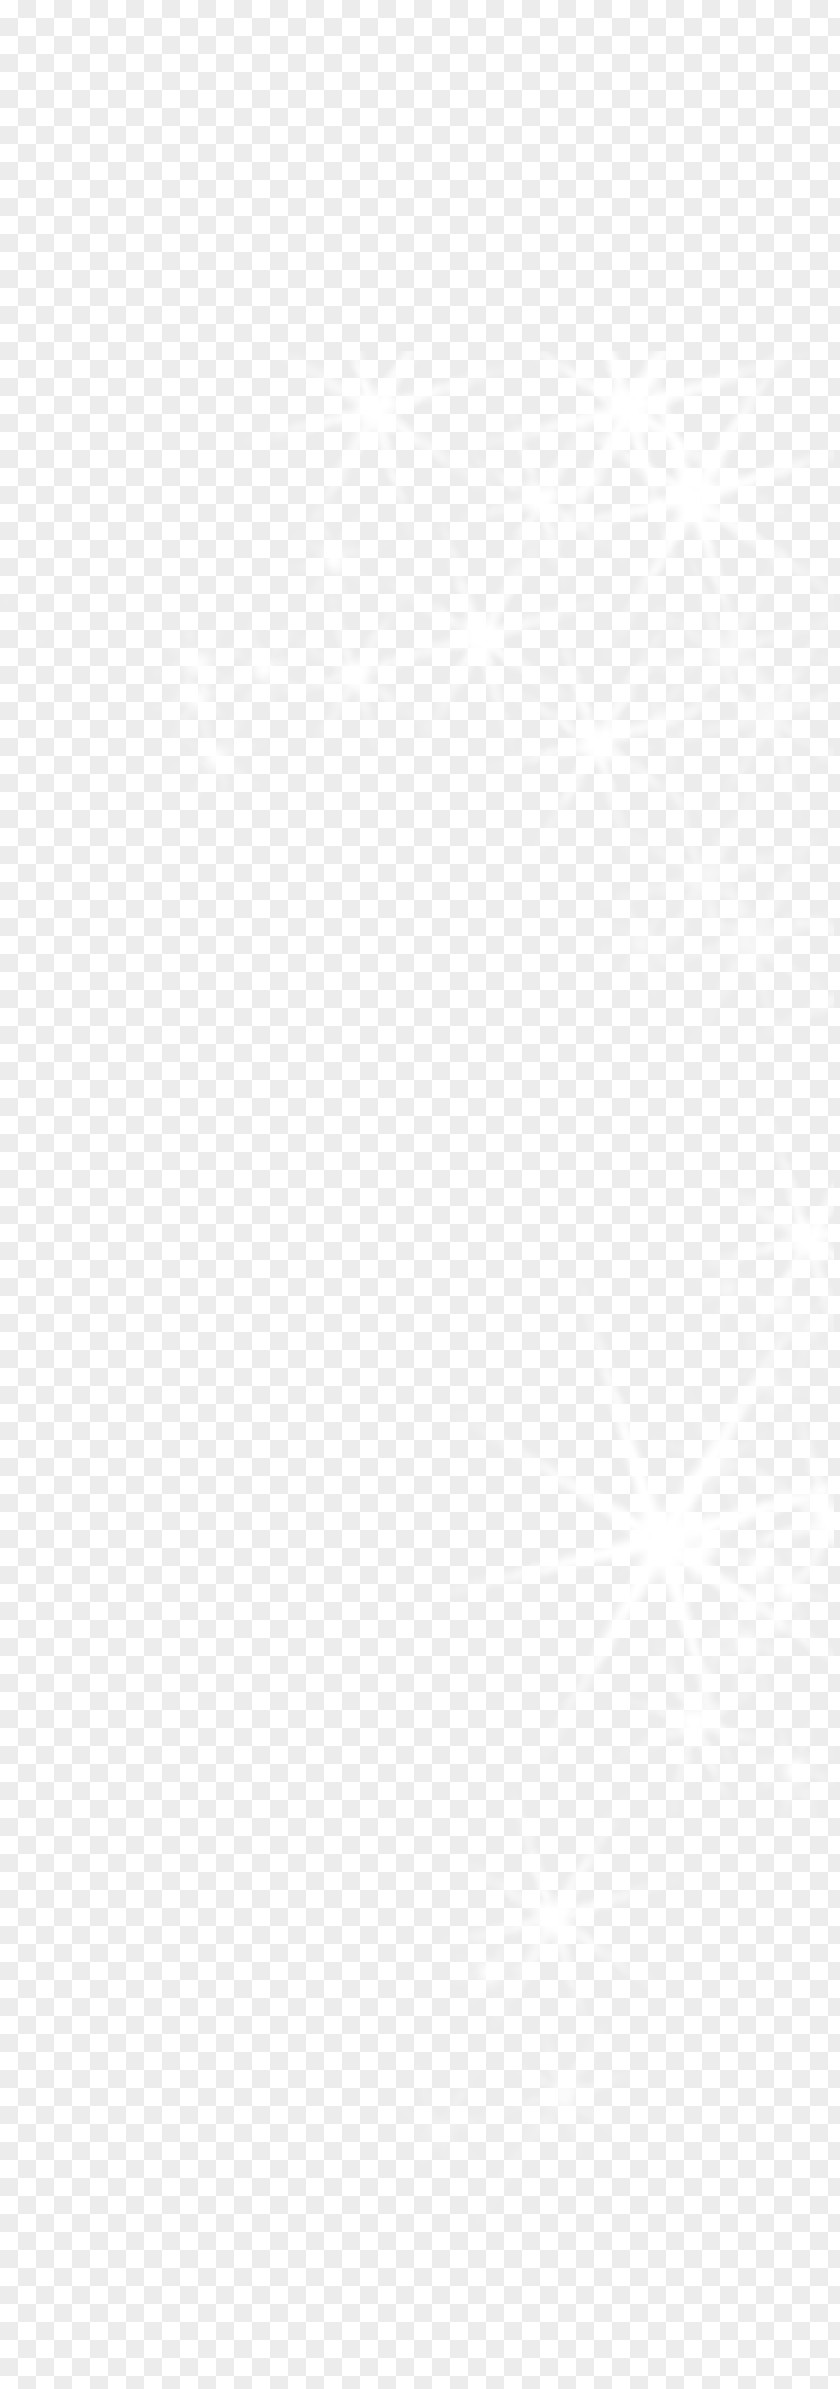 Flash White Black Angle Area Pattern PNG